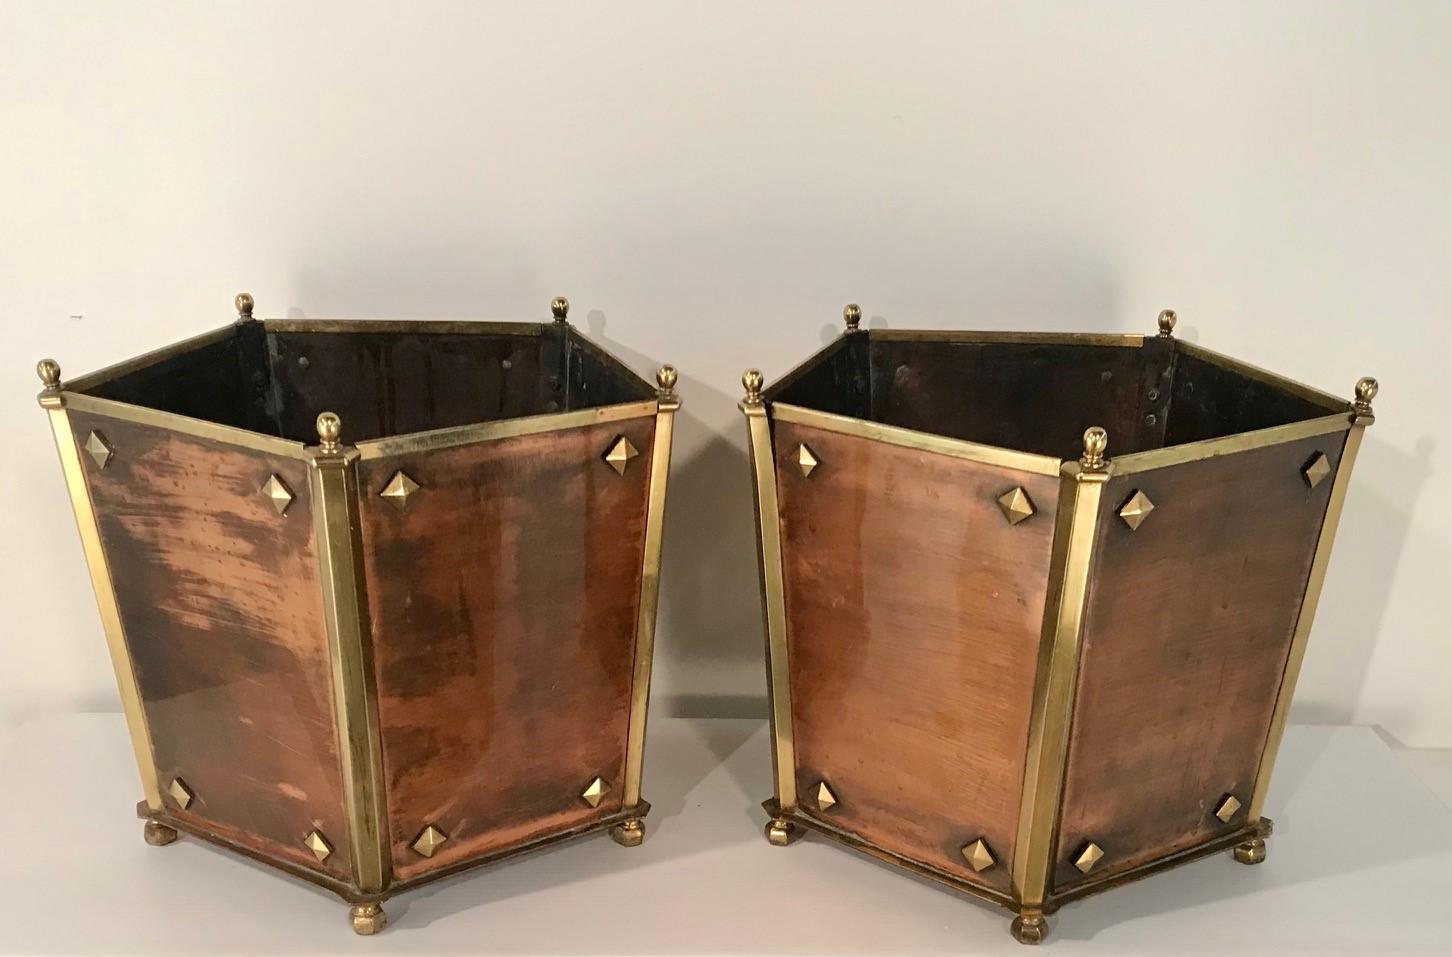 Hand-Crafted Pair of Arts and Crafts Pentagon Brass and Copper Jardinieres For Sale